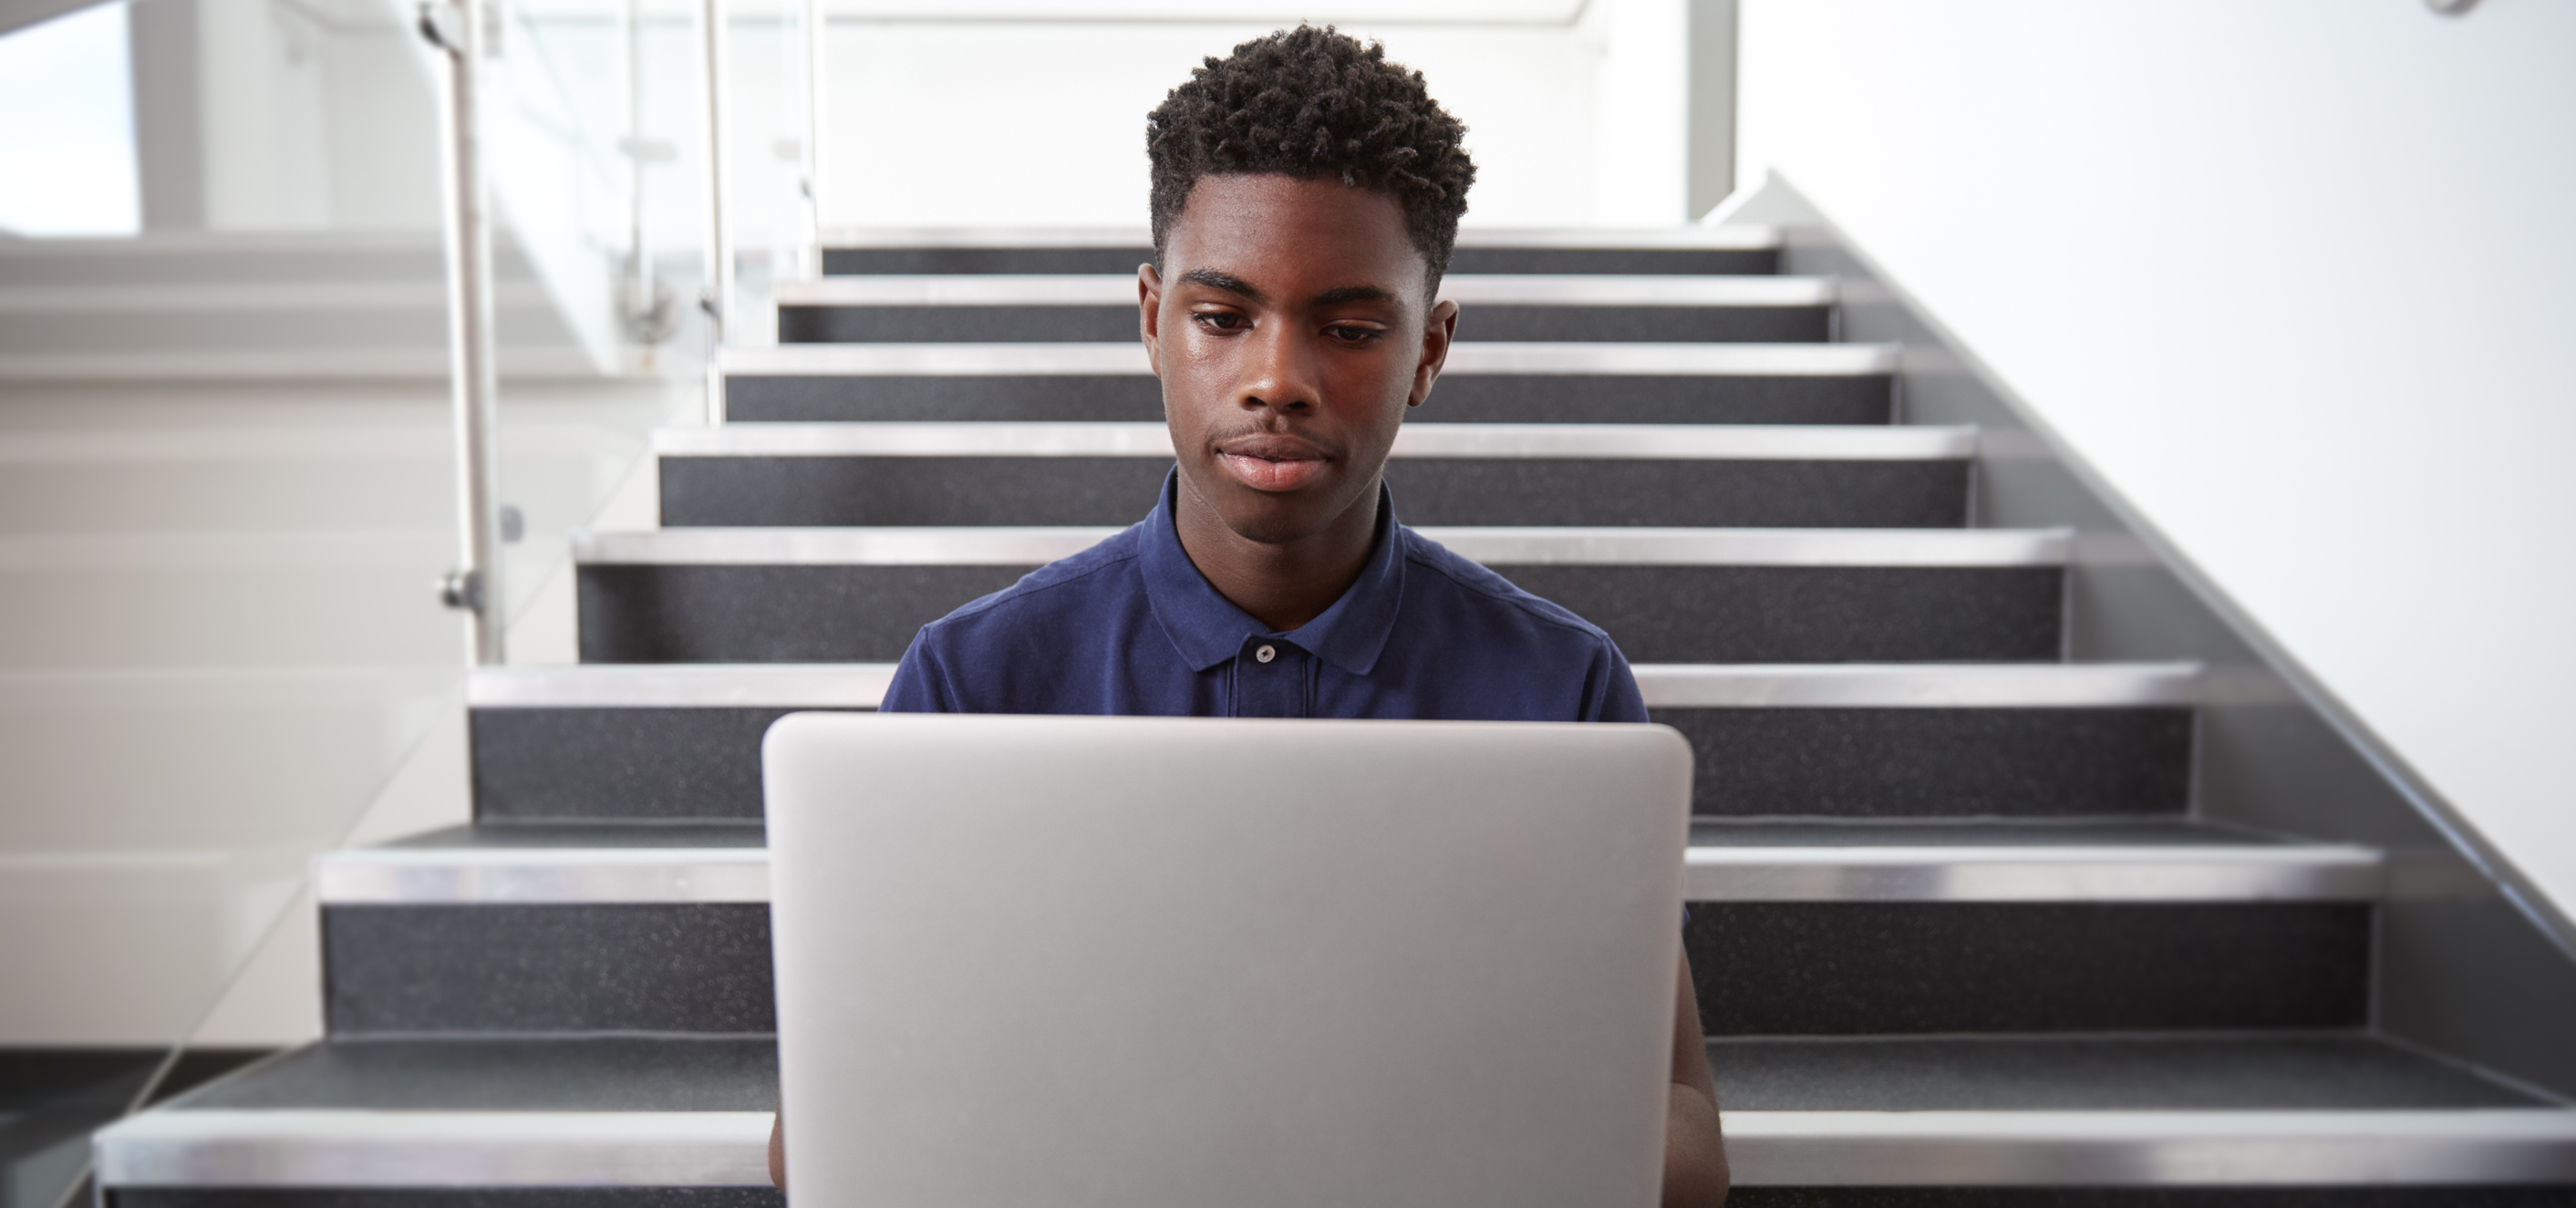 Male high school student sitting on a staircase and using a laptop computer.